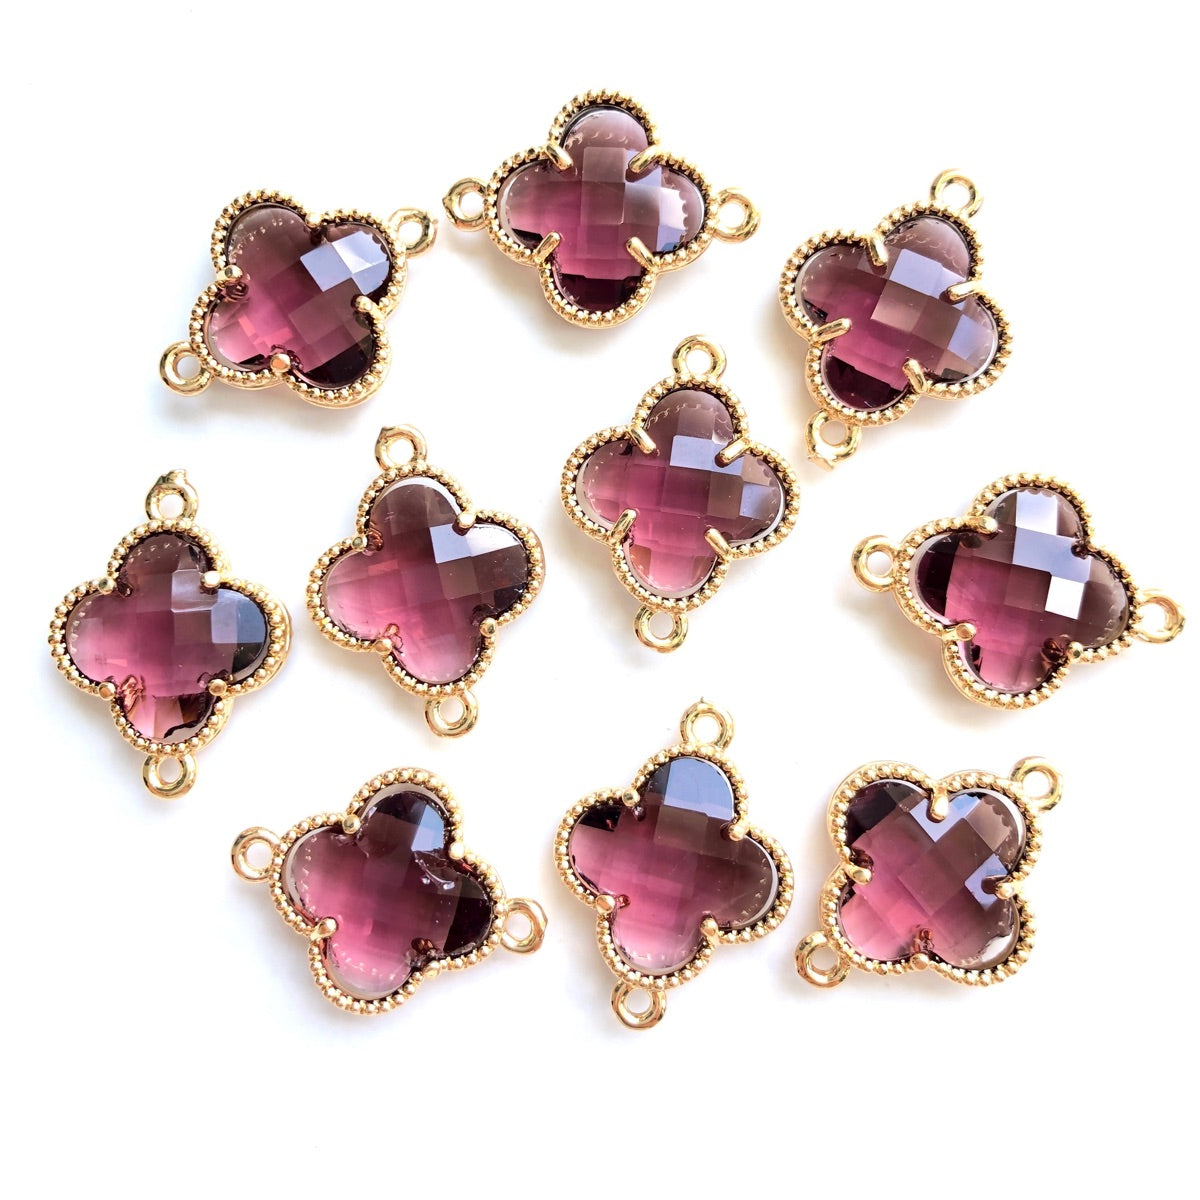 10pcs/Lot Gold Plated Glass Crystal Clover Flower Connectors Grape Purple Stone Charms Flower Glass Beads New Charms Arrivals Charms Beads Beyond